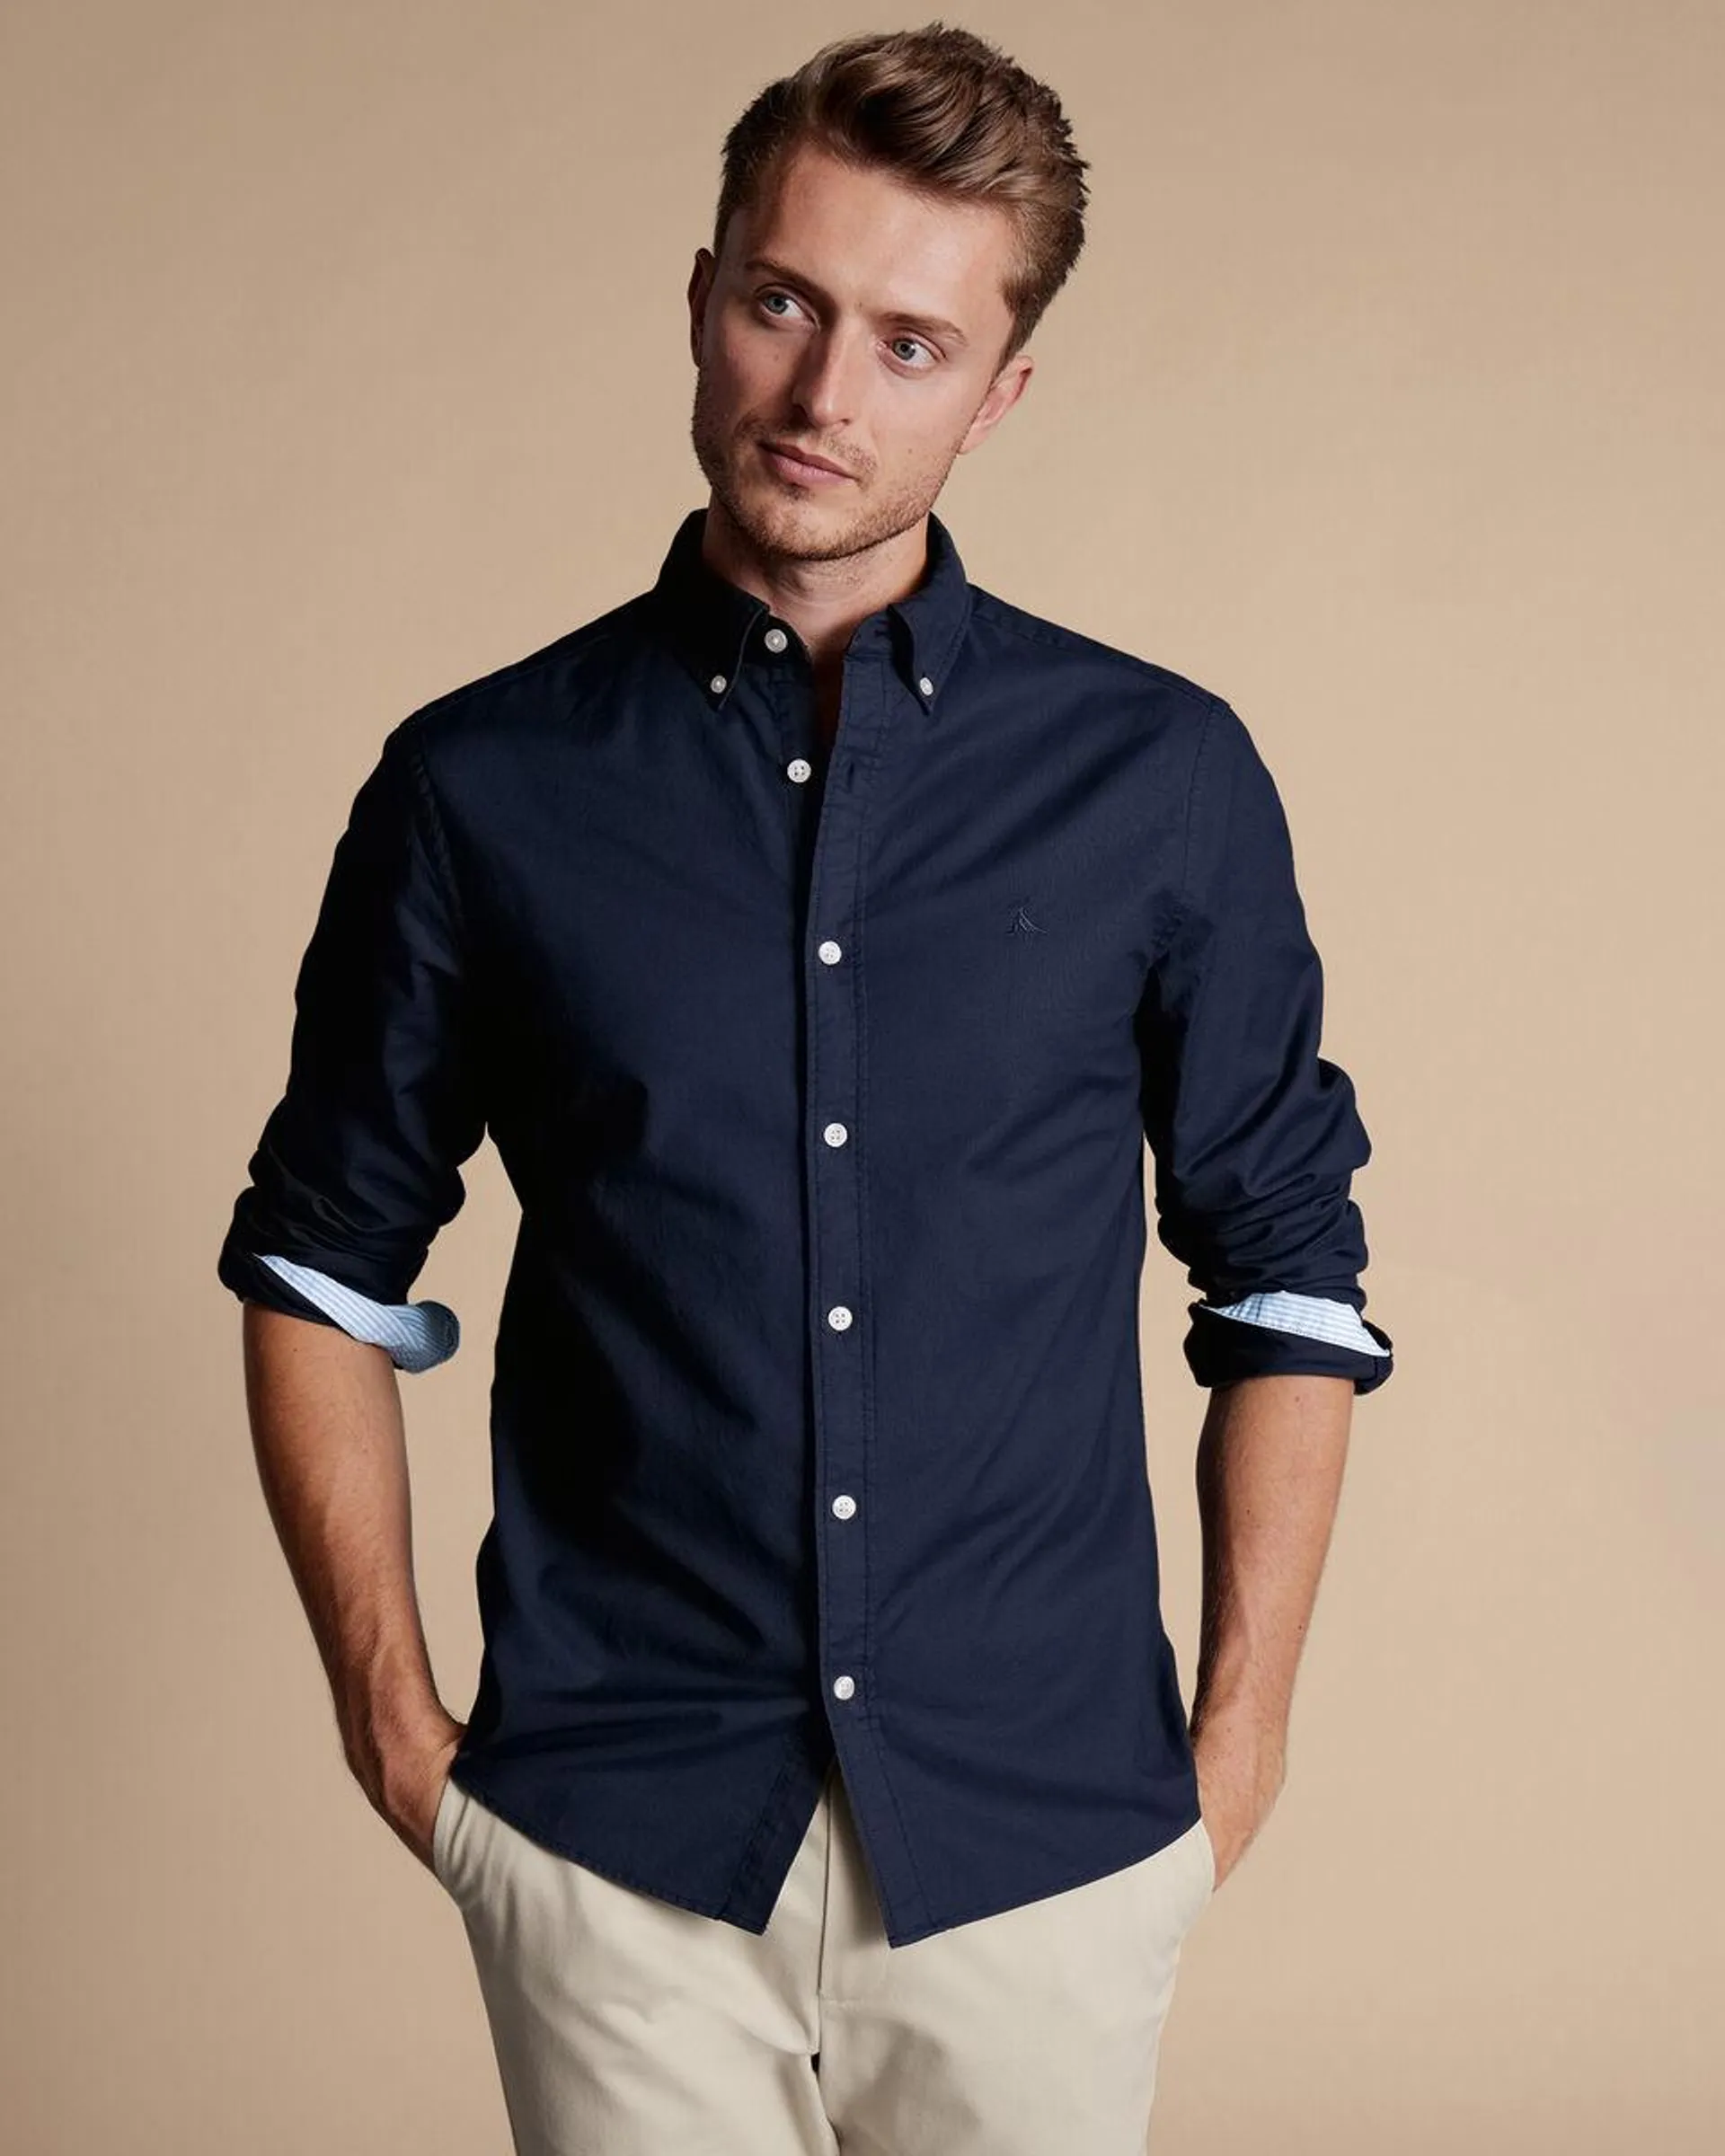 details about product: Button-Down Collar Stretch Washed Oxford Shirt - Navy Blue